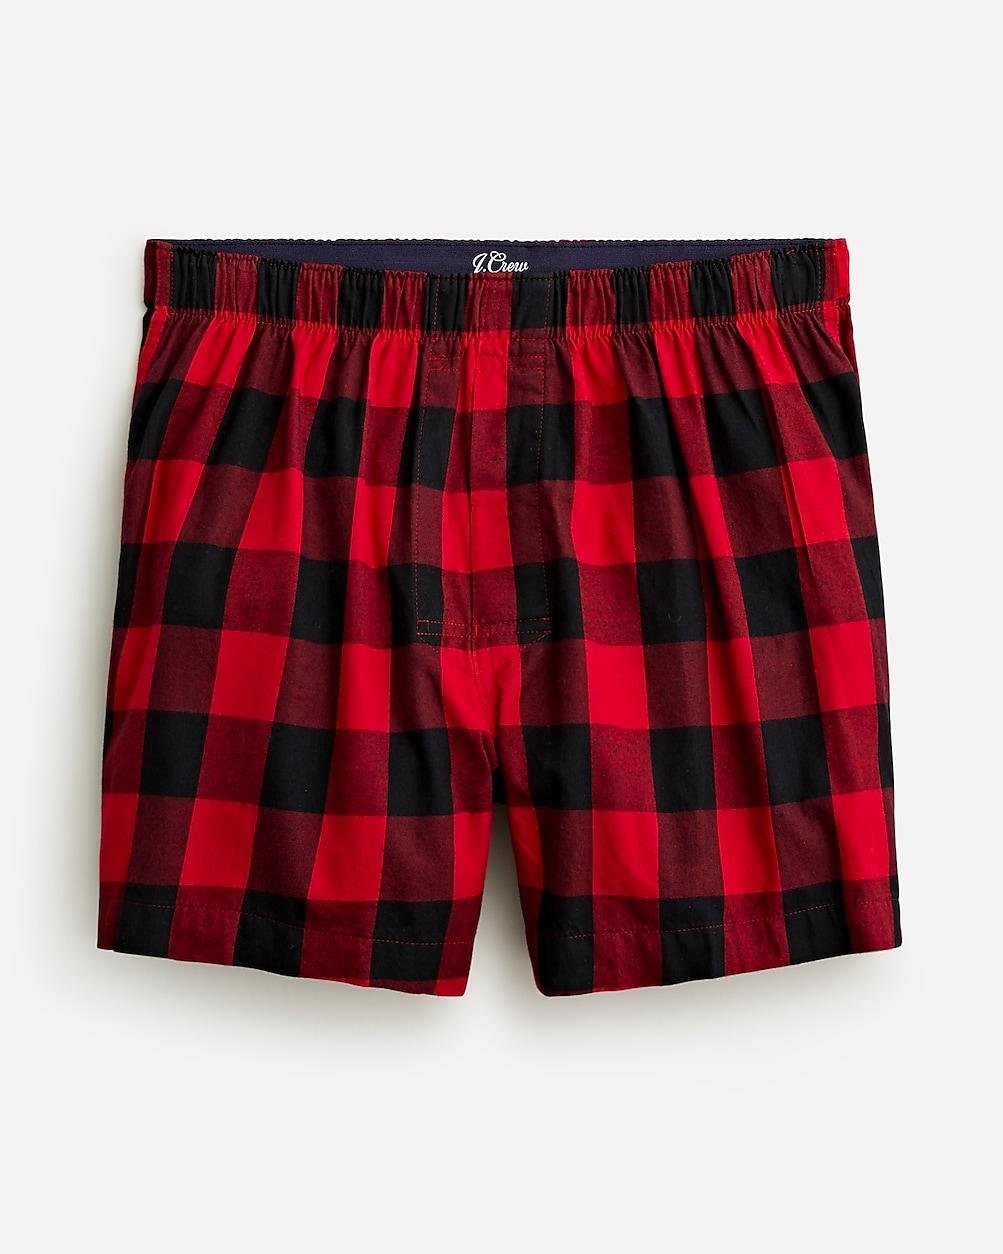 Brushed twill boxers by J.CREW